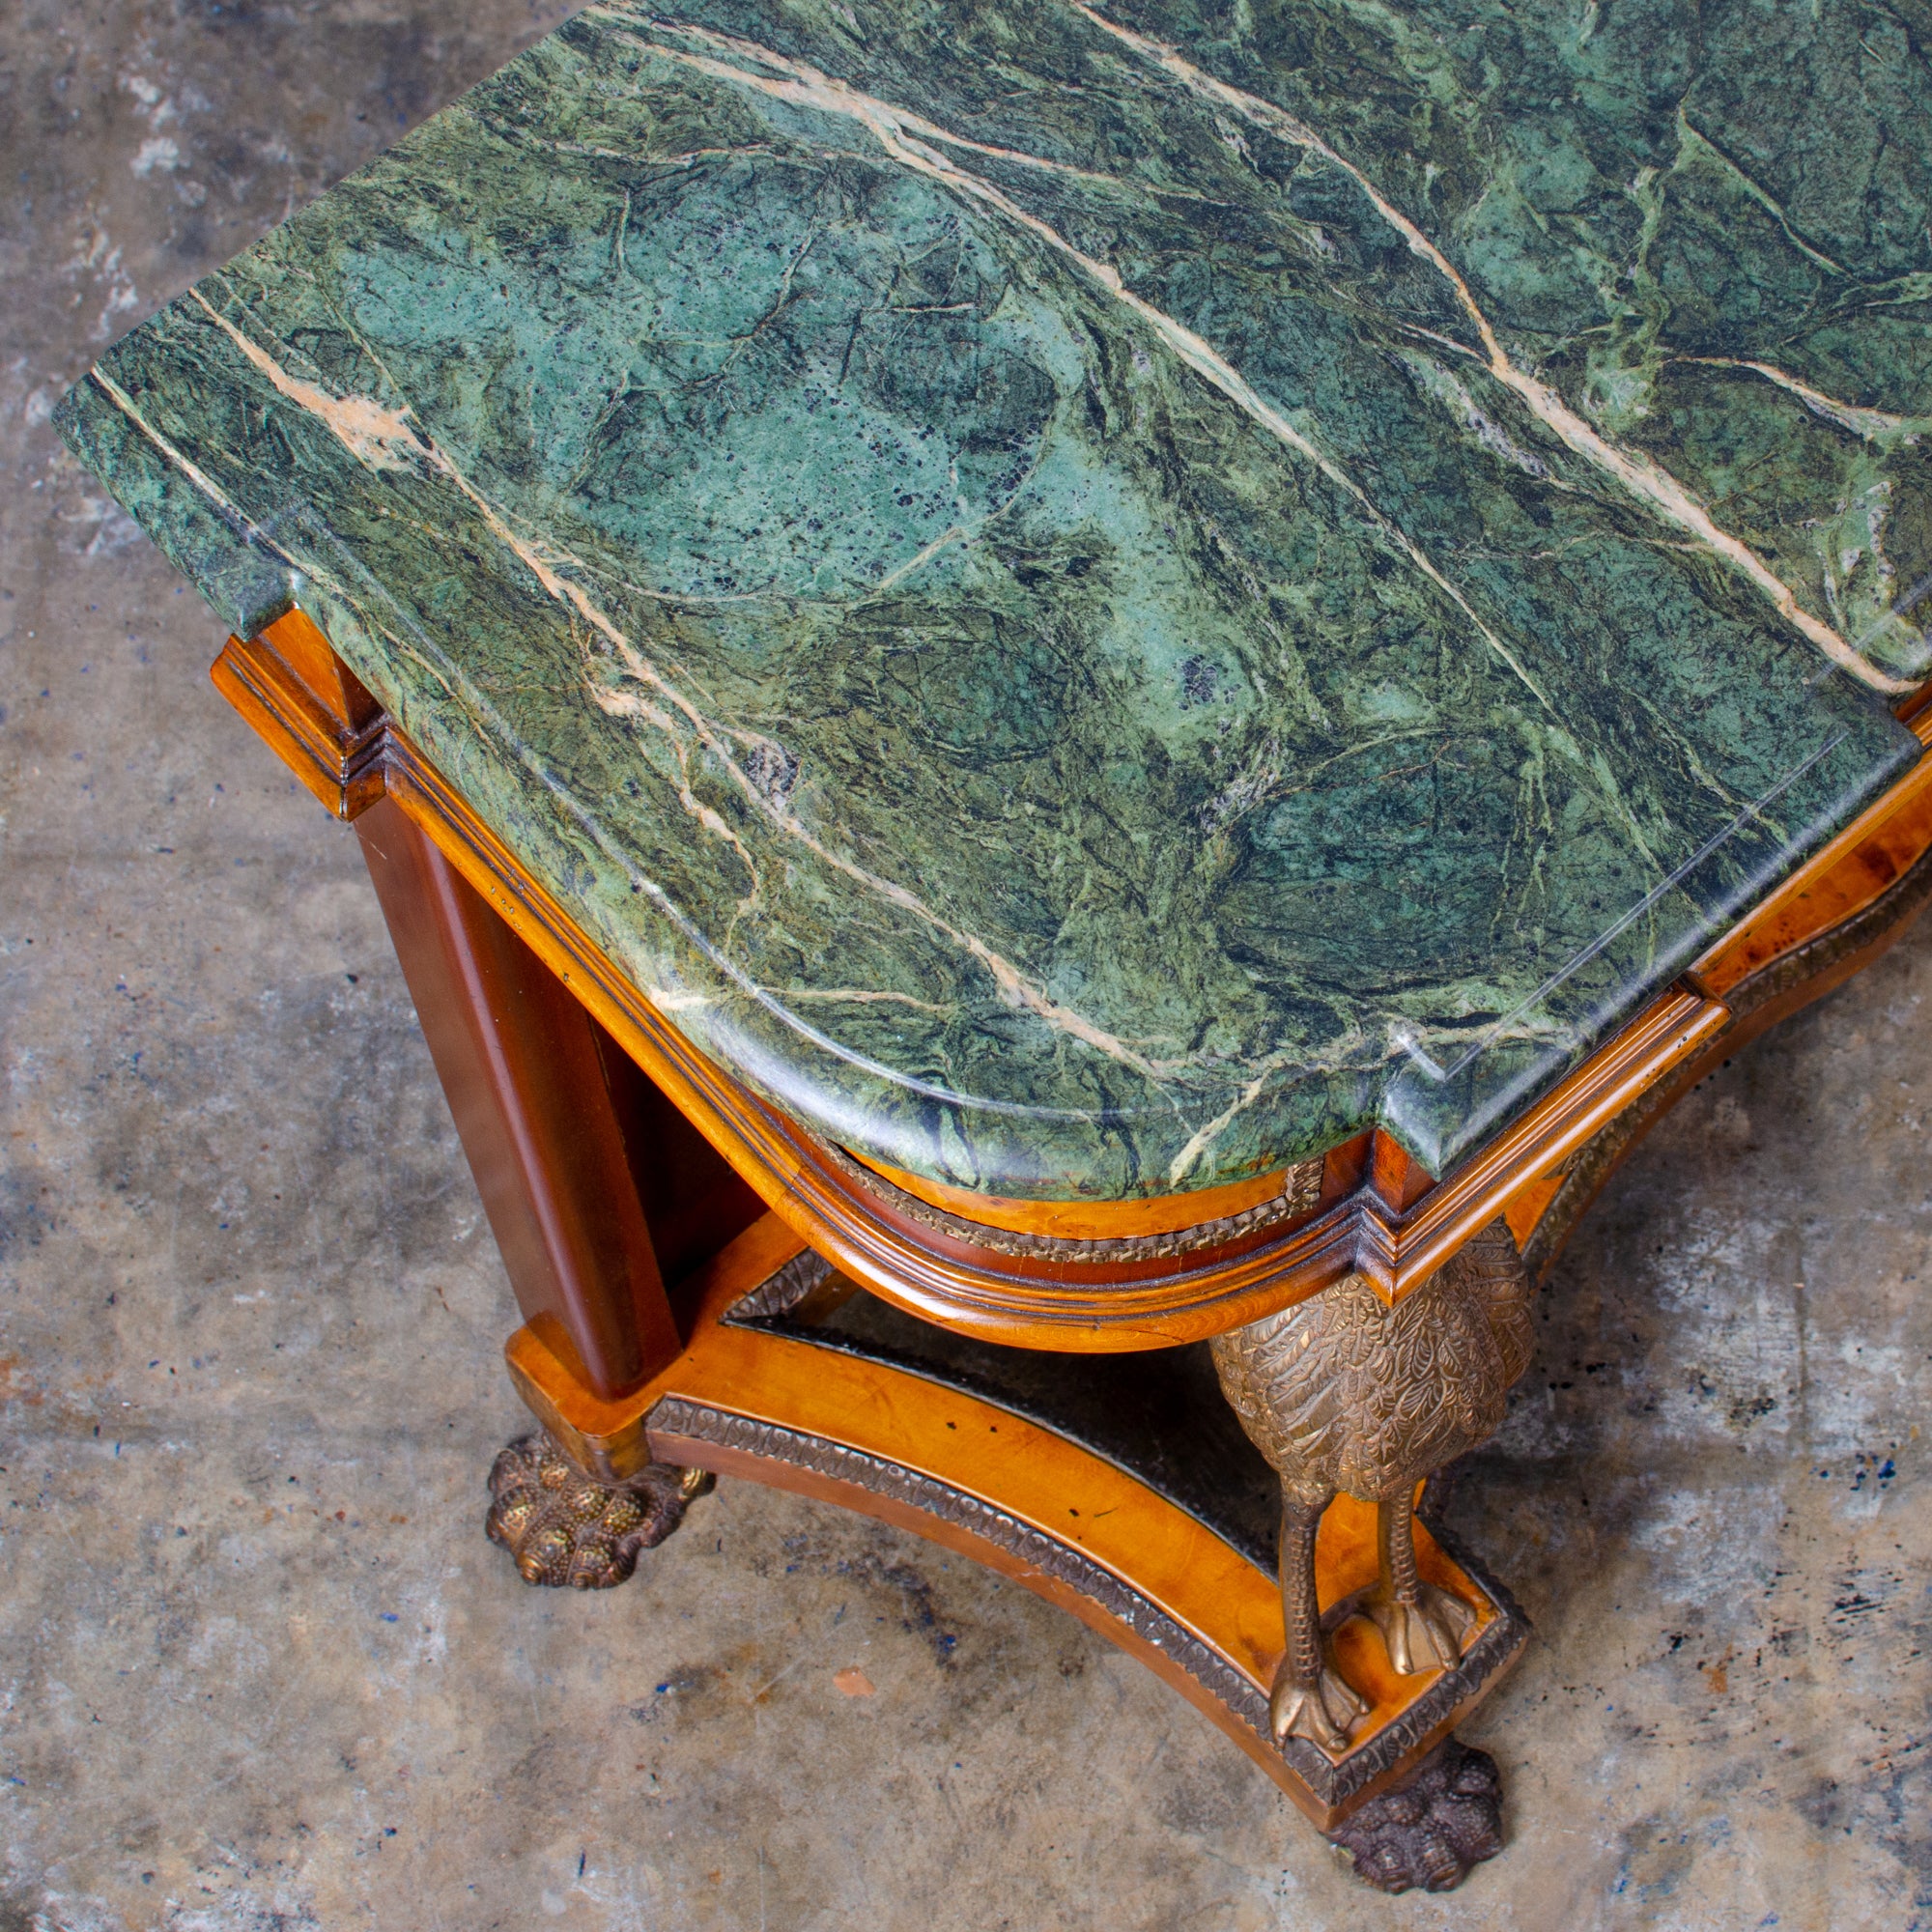 French Empire Style Pier Table